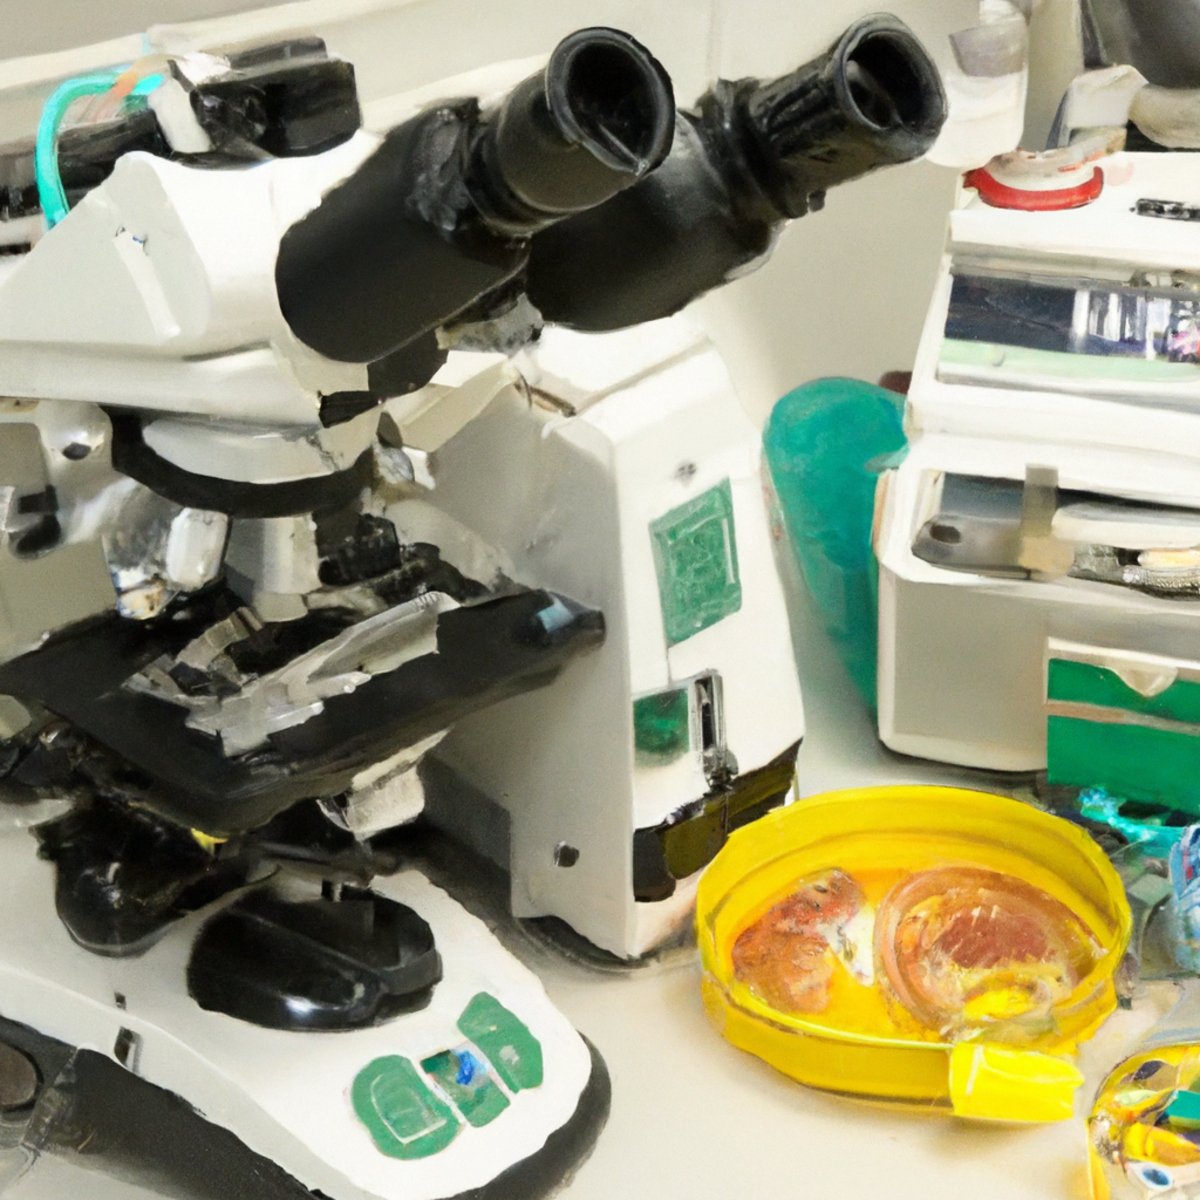 Lab equipment and tools for studying Hypohidrotic Ectodermal Dysplasia, highlighting scientific exploration and dedication.